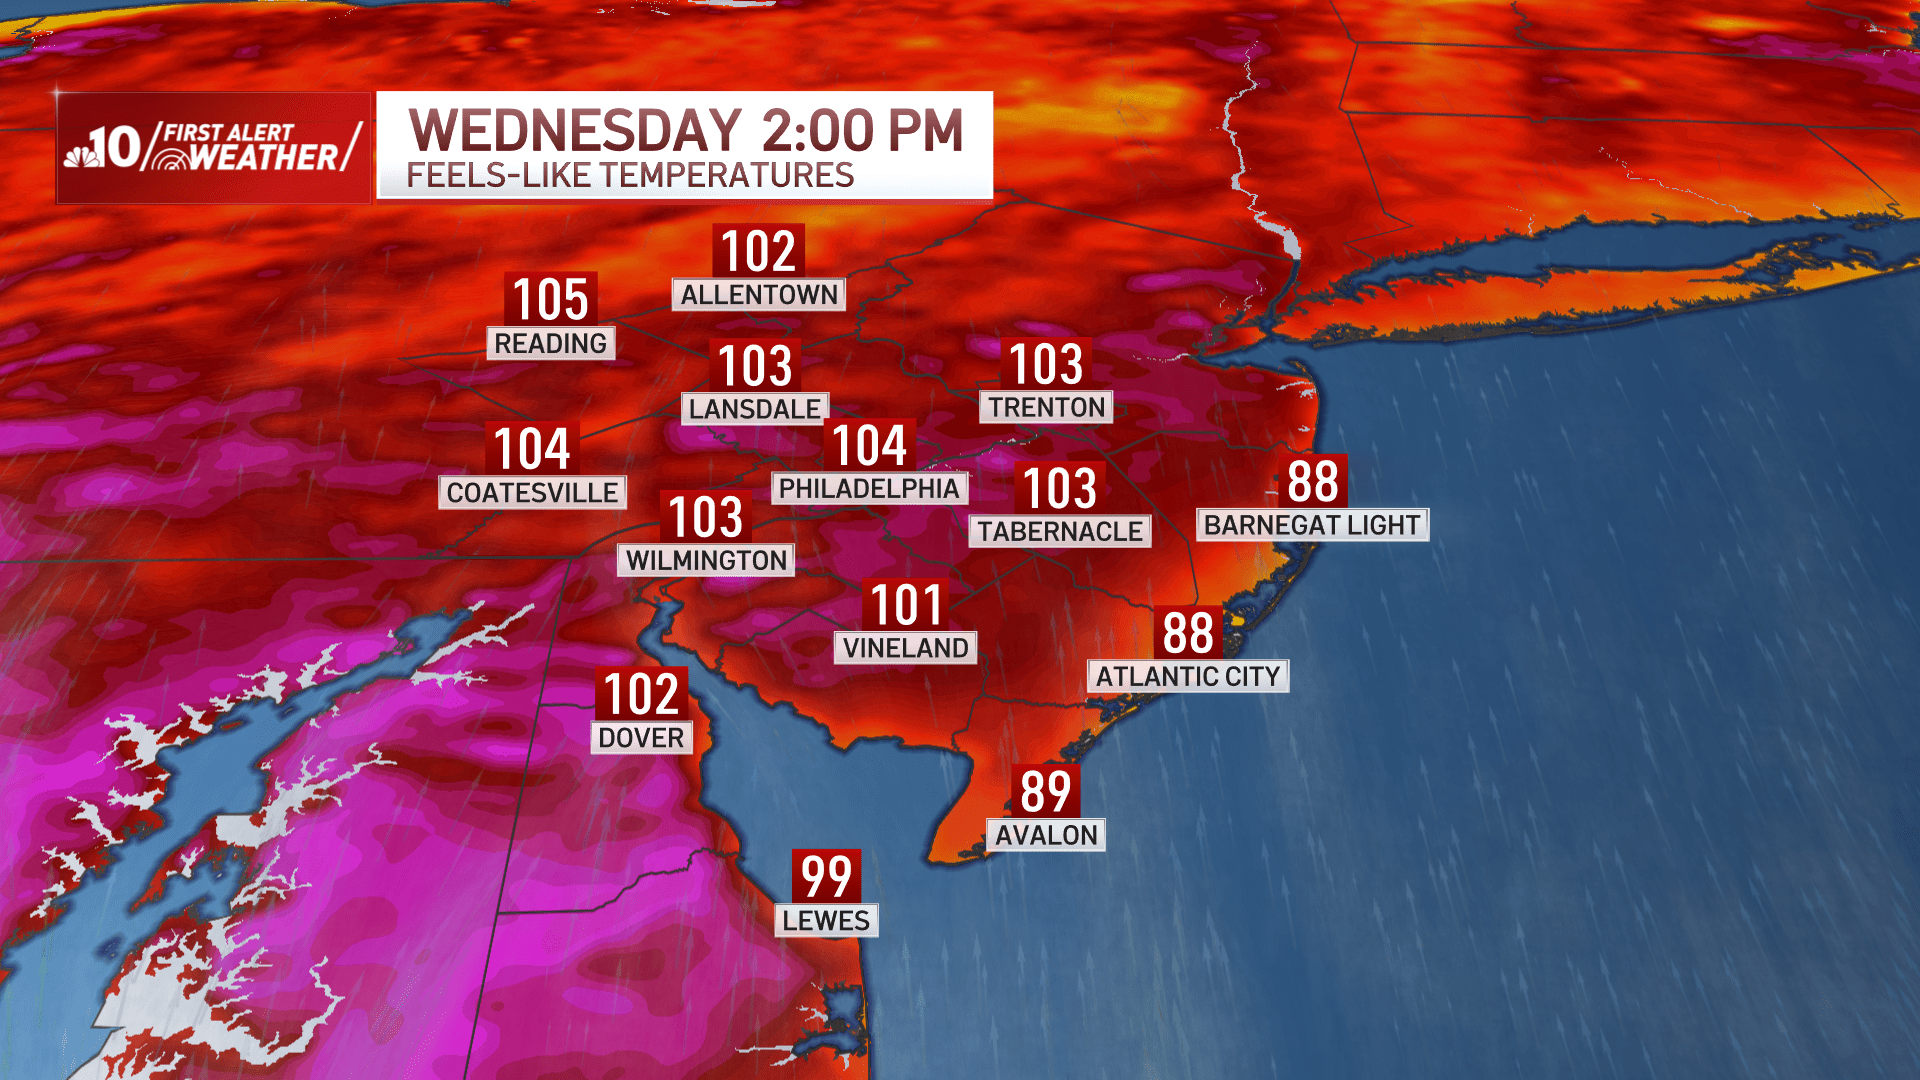 Temps will be feeling over 100 in much of the Philadelphia region Wednesday, July 10